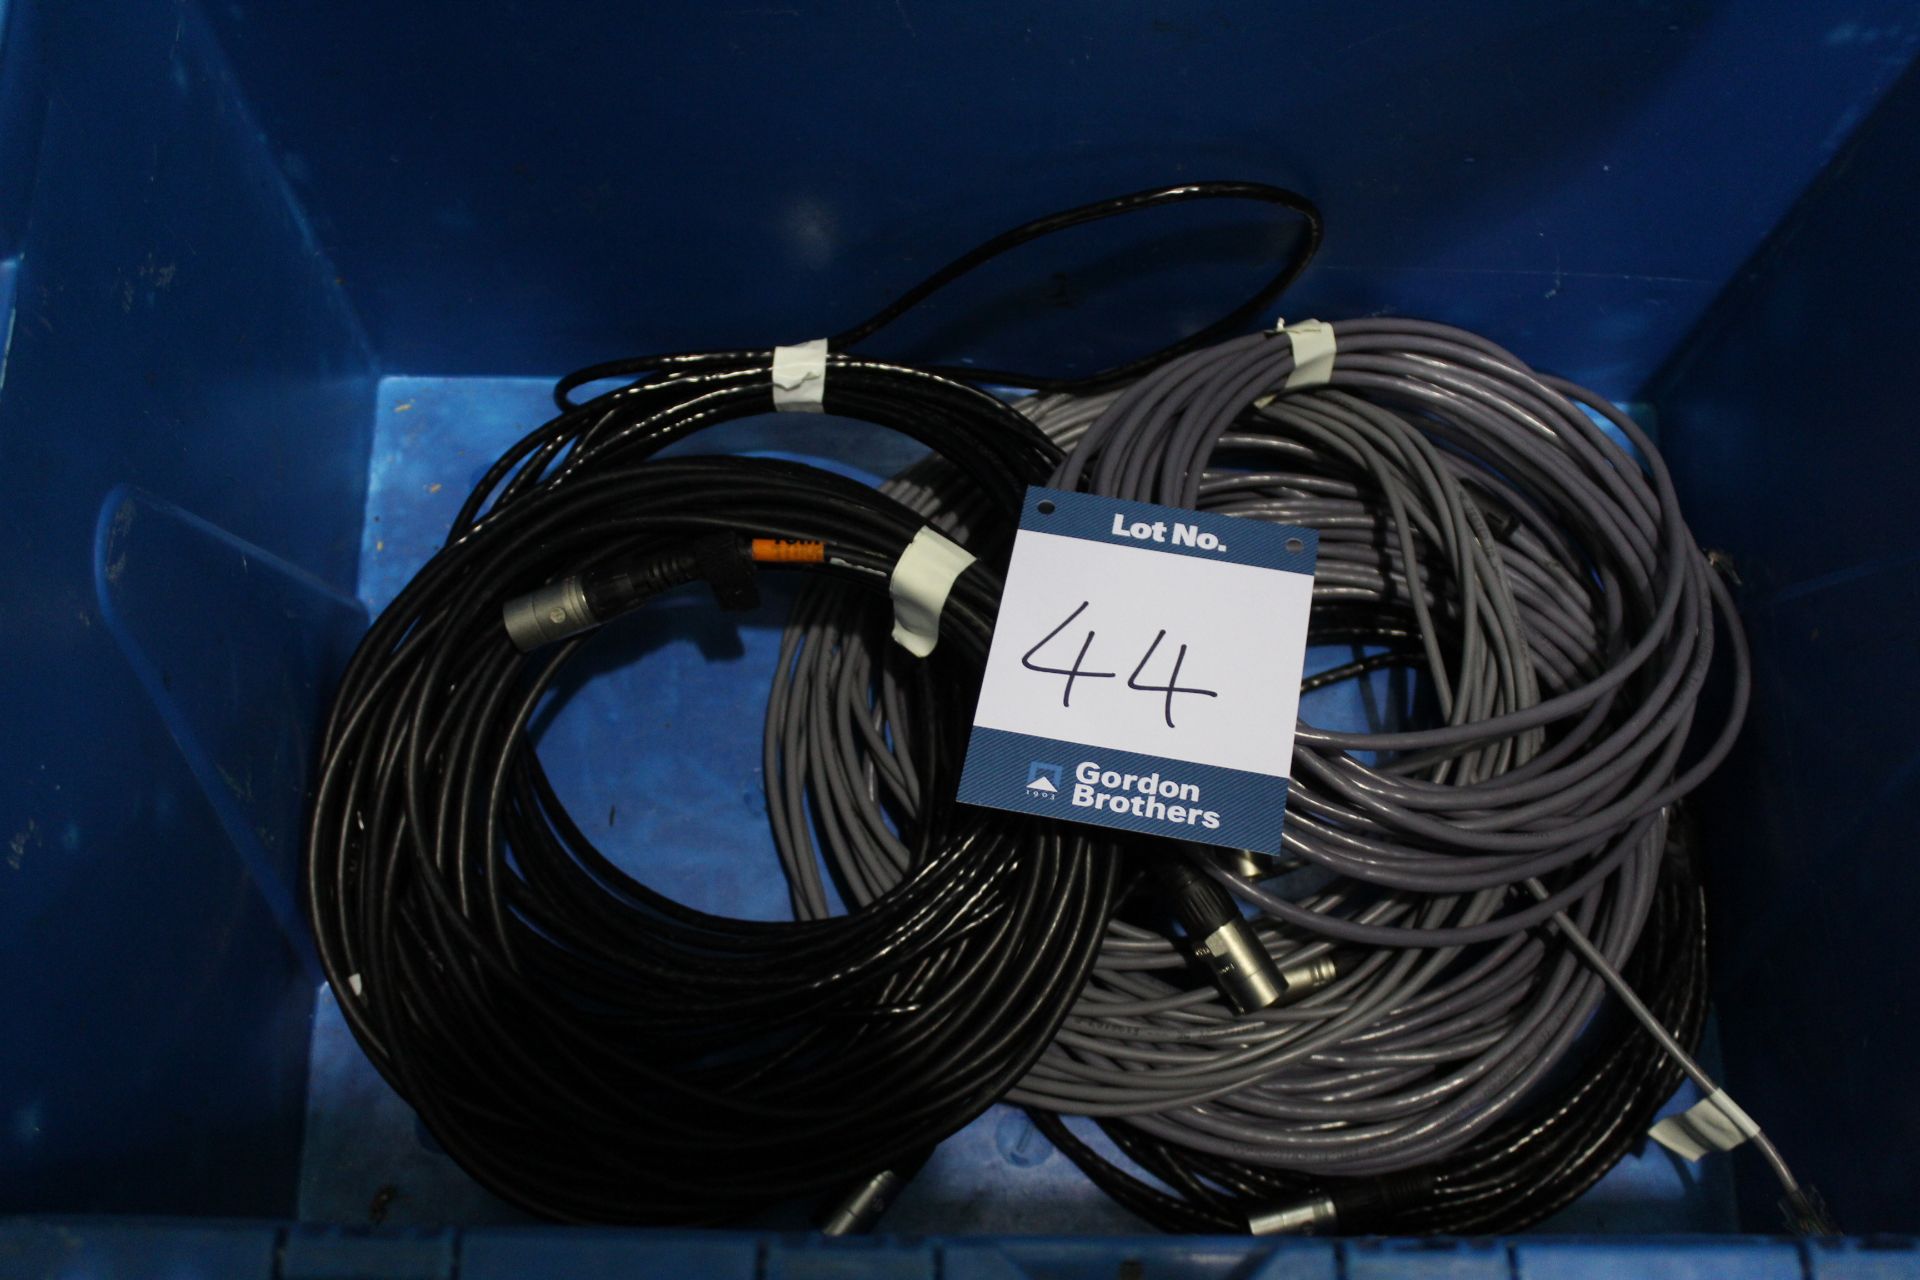 Approx. 10x 10m CAT5 cables in 600mm x 400mm plastic tote bin used for P2.6 LED display. (PLEASE